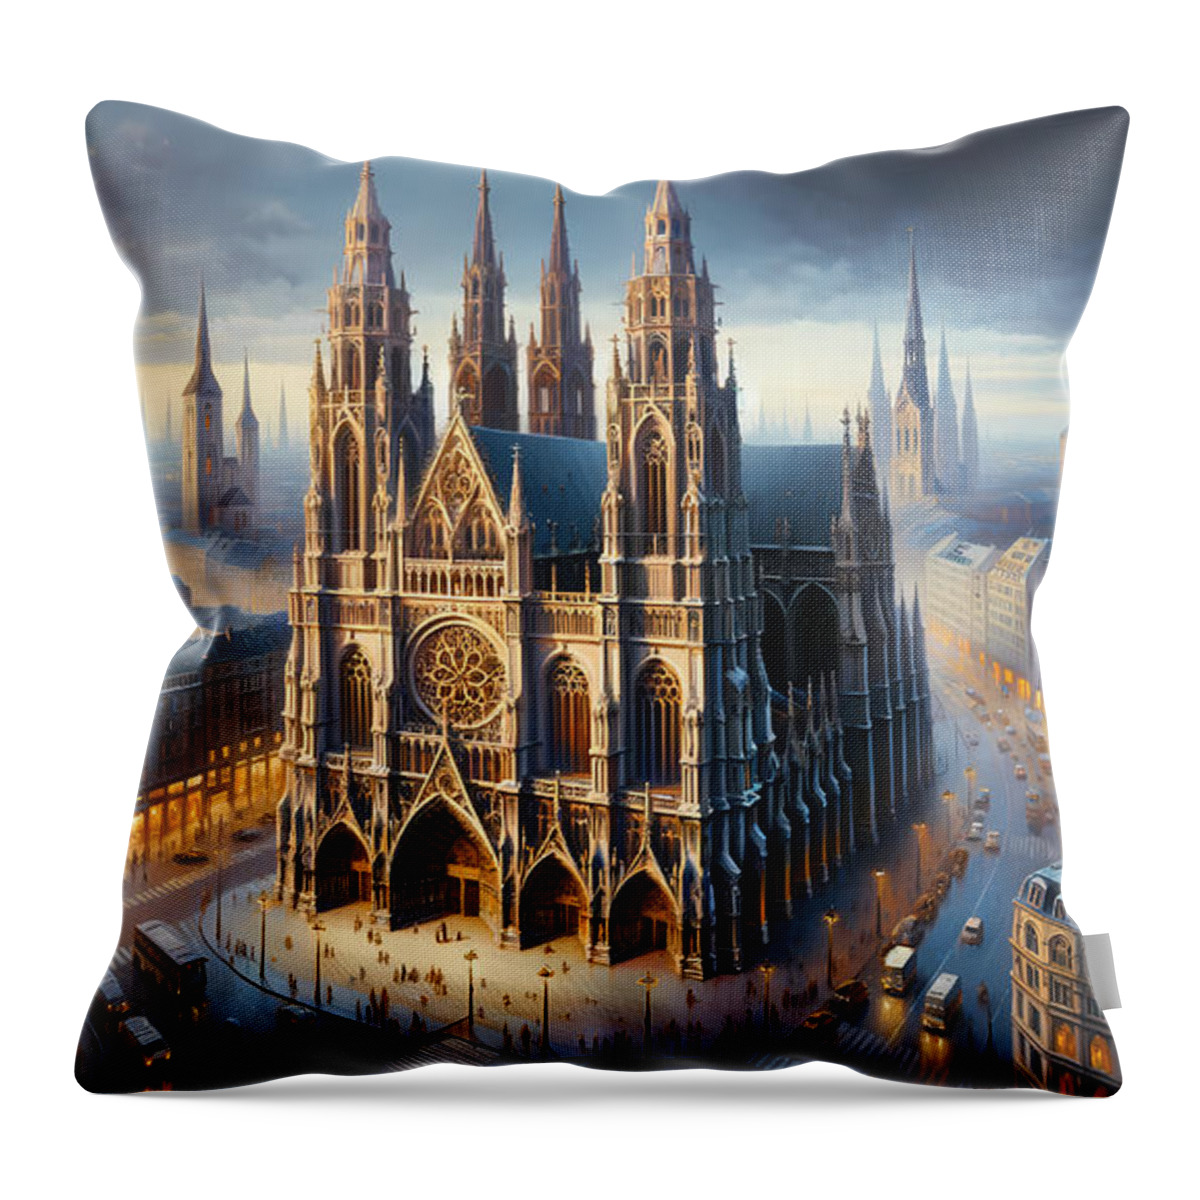 Grandiose Throw Pillow featuring the painting A grandiose Gothic cathedral in an urban setting by Jeff Creation